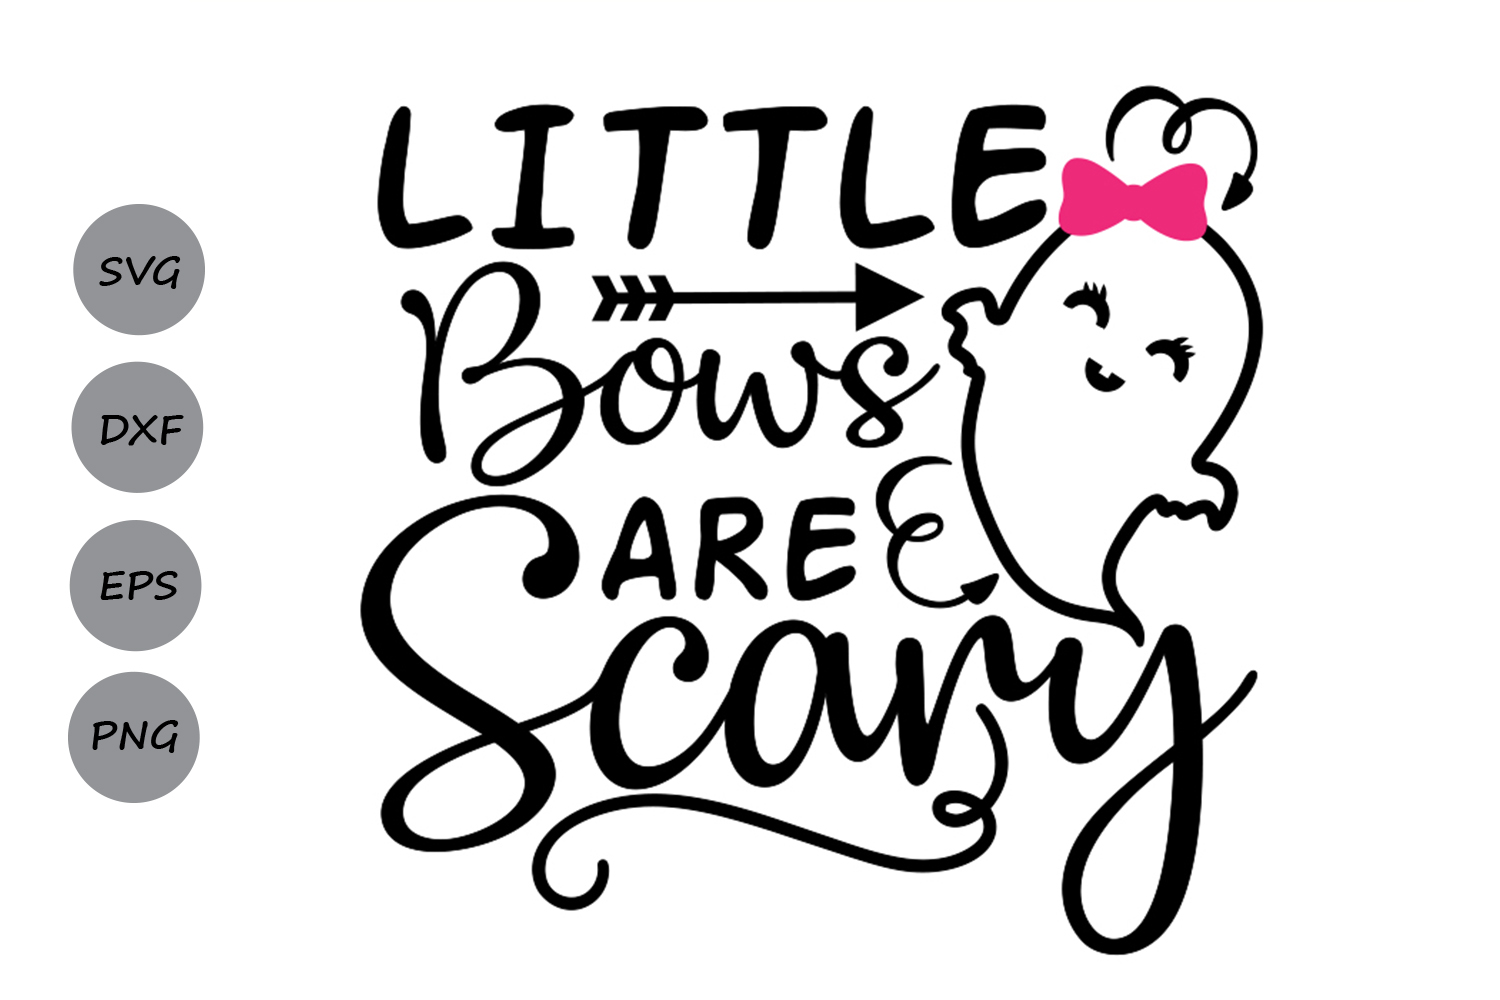 Little bows are scary svg, halloween svg, ghost svg. (153857) | SVGs